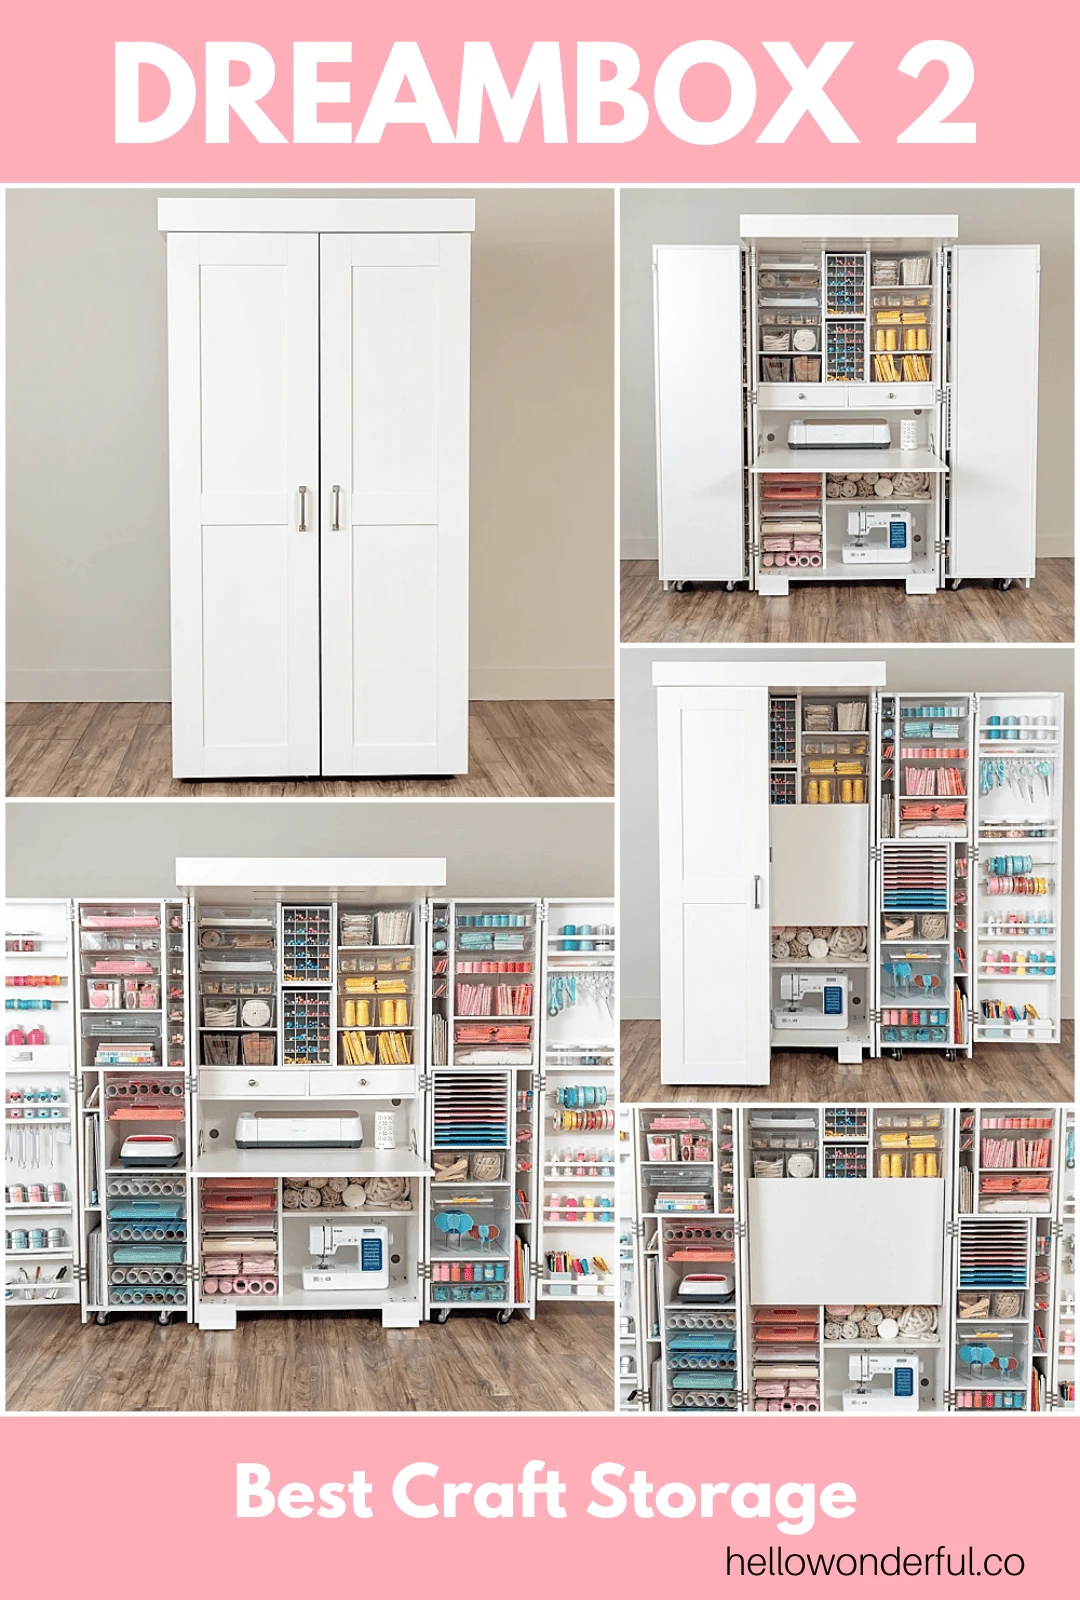  MAXTED Craft Cabinet,Craft Storage Cabinet,Pantry Pantry  Cabinets with Doors and Shelves,Dream Box Craft Storage Cabinet for  Kitchen,Dinning Room,Living Room,Small Place : Home & Kitchen